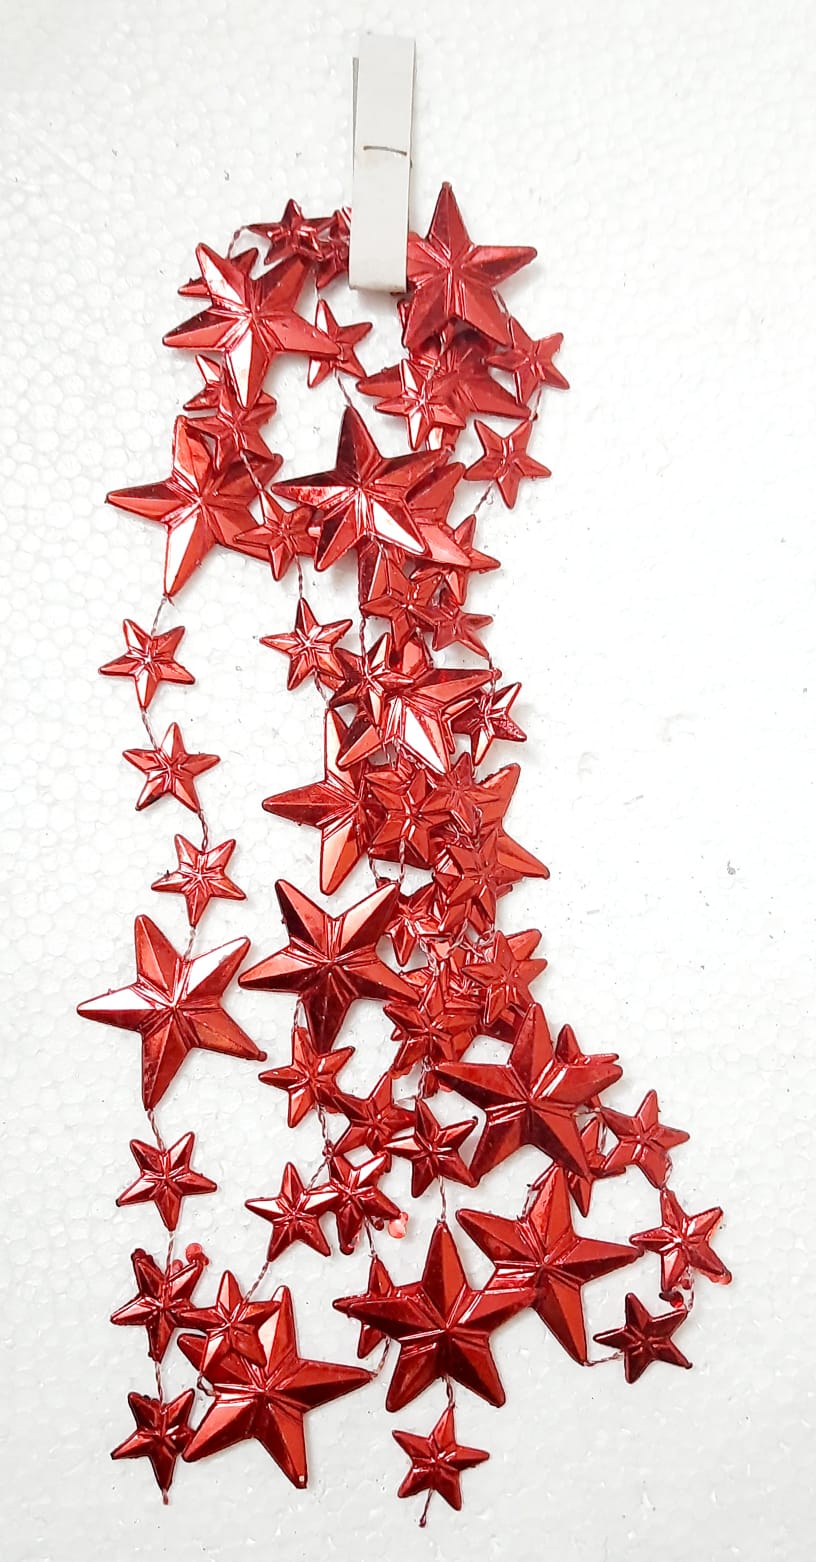 Christmas Hollow Star Xmas Tree Decorations Ornaments Ball Chain Hanging - Red